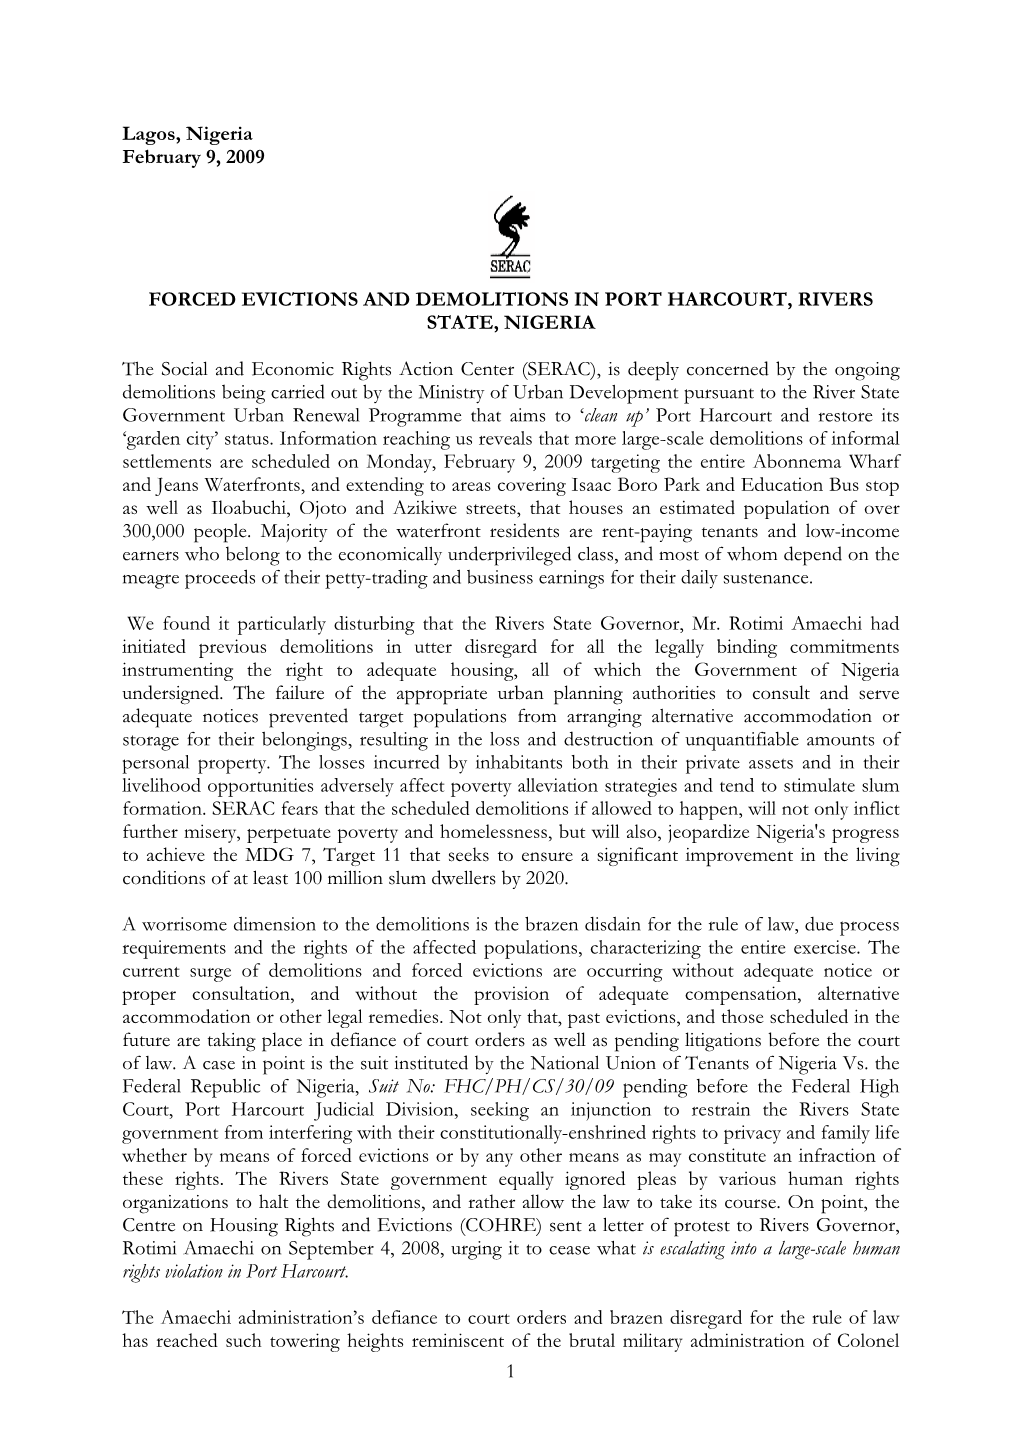 Application/Pdfpress Release SERAC Against Demolition in Port Harcourt